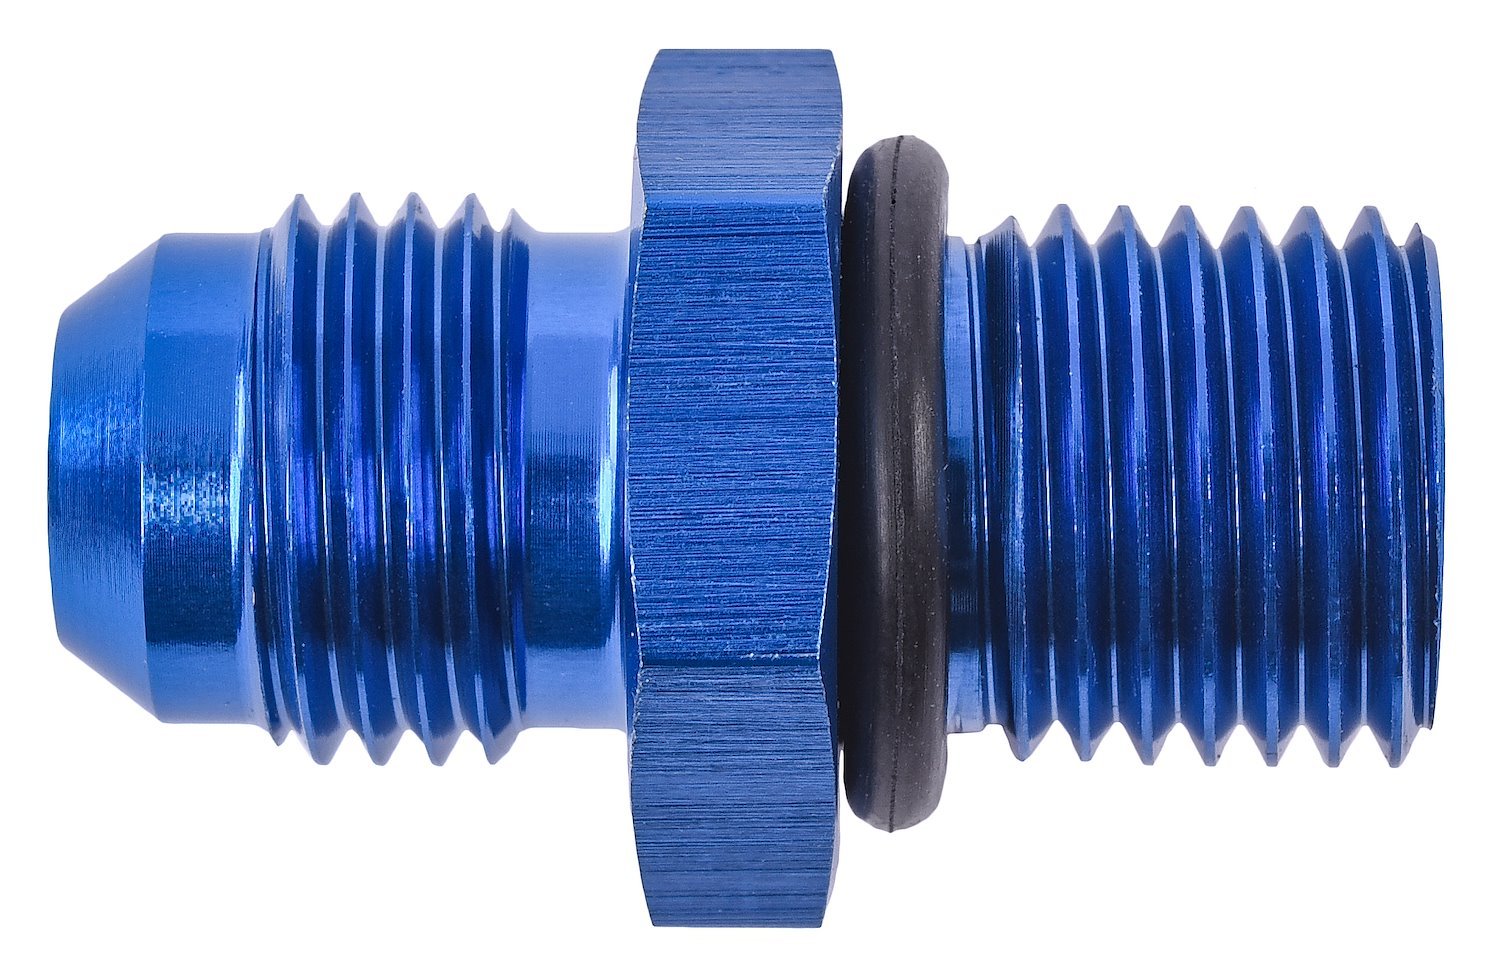 AN Port Adapter Fitting [Metric O-Ring Port (14mm